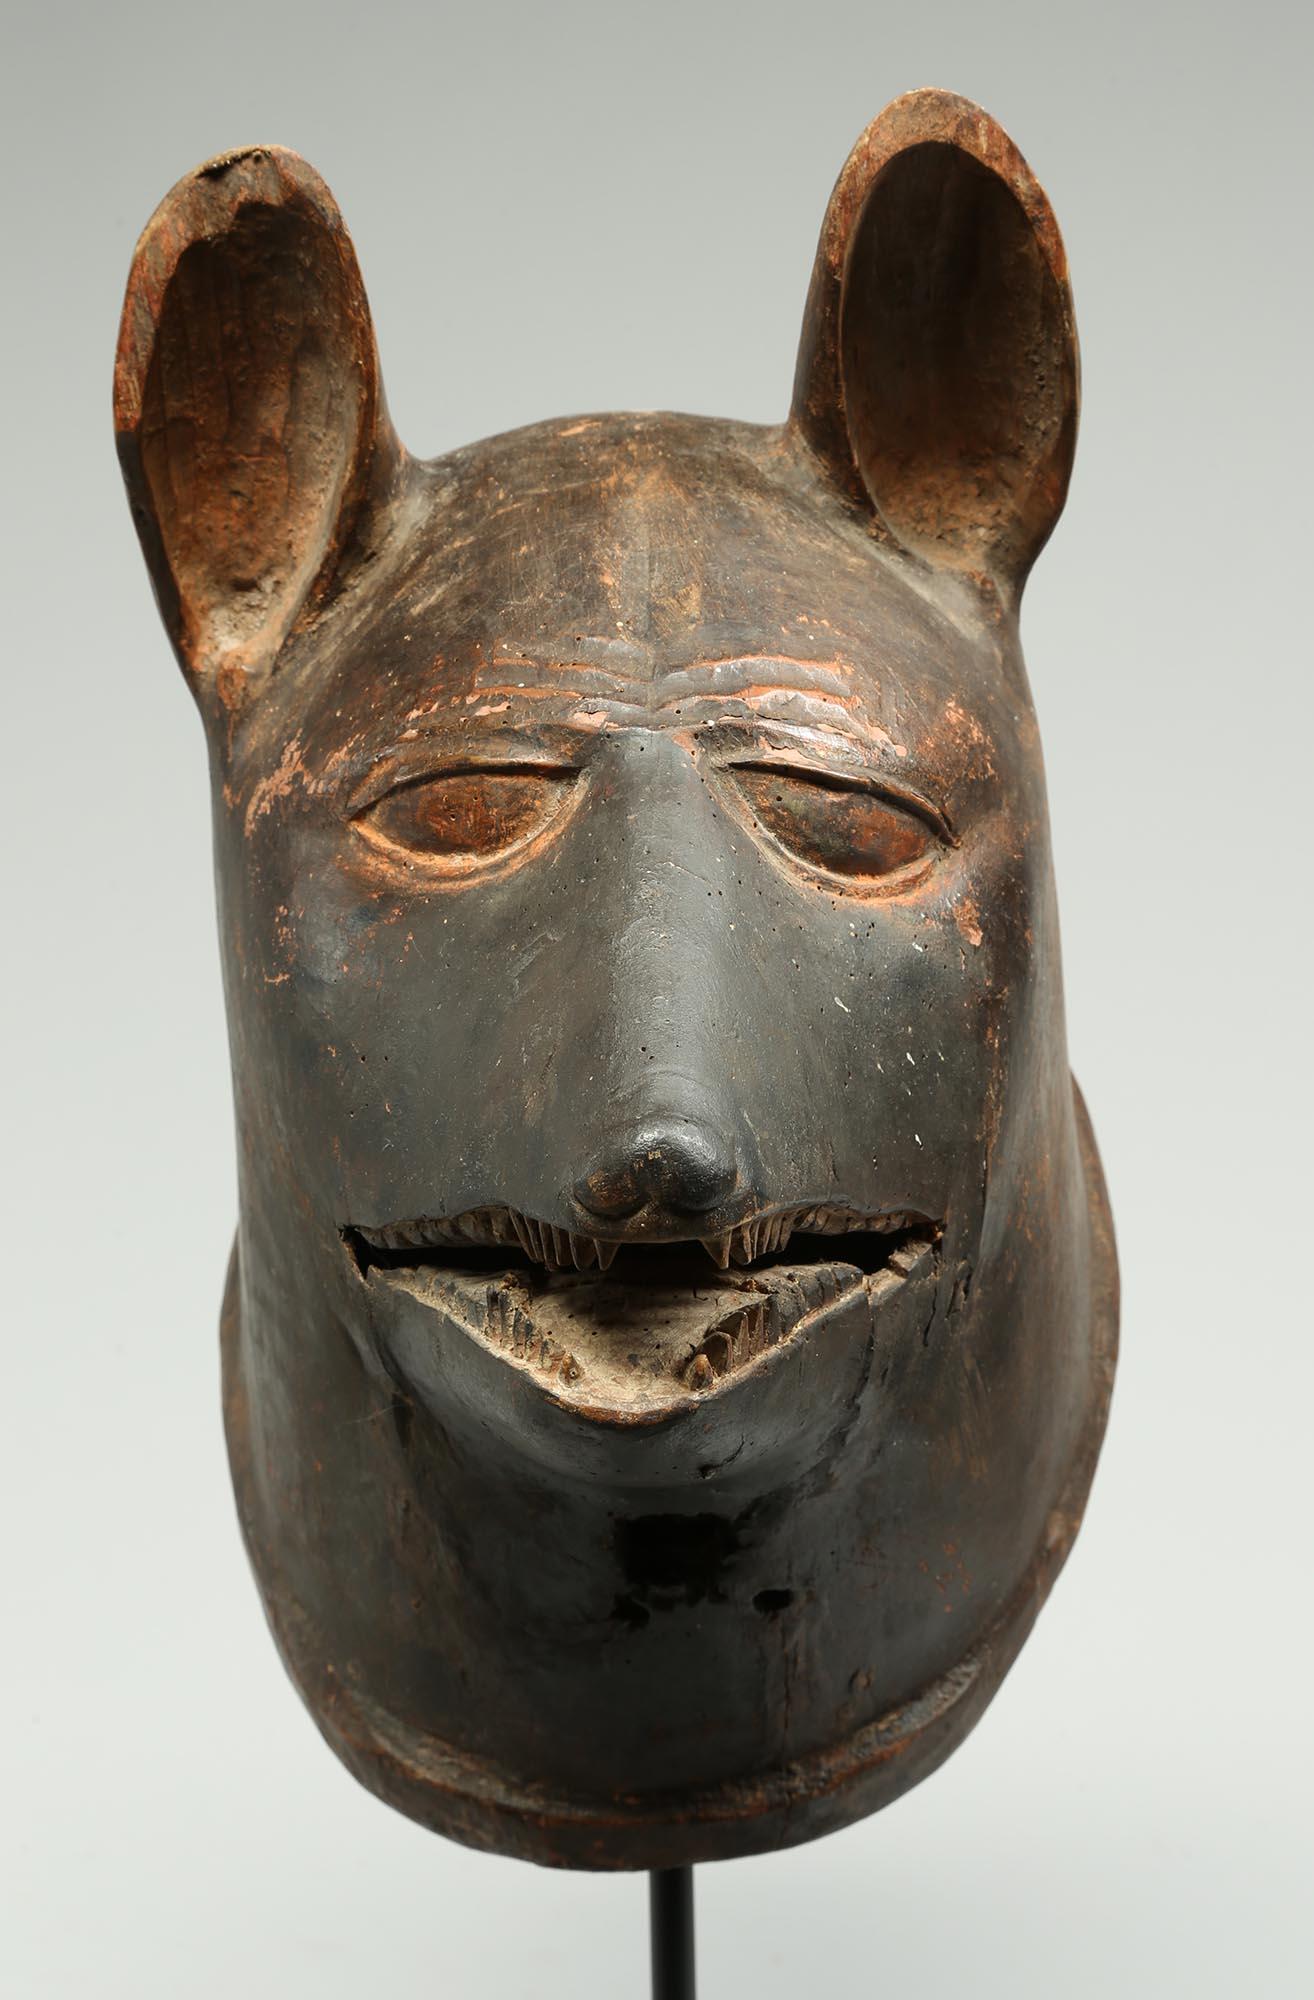 Striking Makonde animal helmet mask, dog or hyena, Tanzania. Early 20th century with dark patina from traditional tribal use, wear inside from being used. Finely carved features, with perky ears, open eyes and long pointed mouth with lots of teeth.